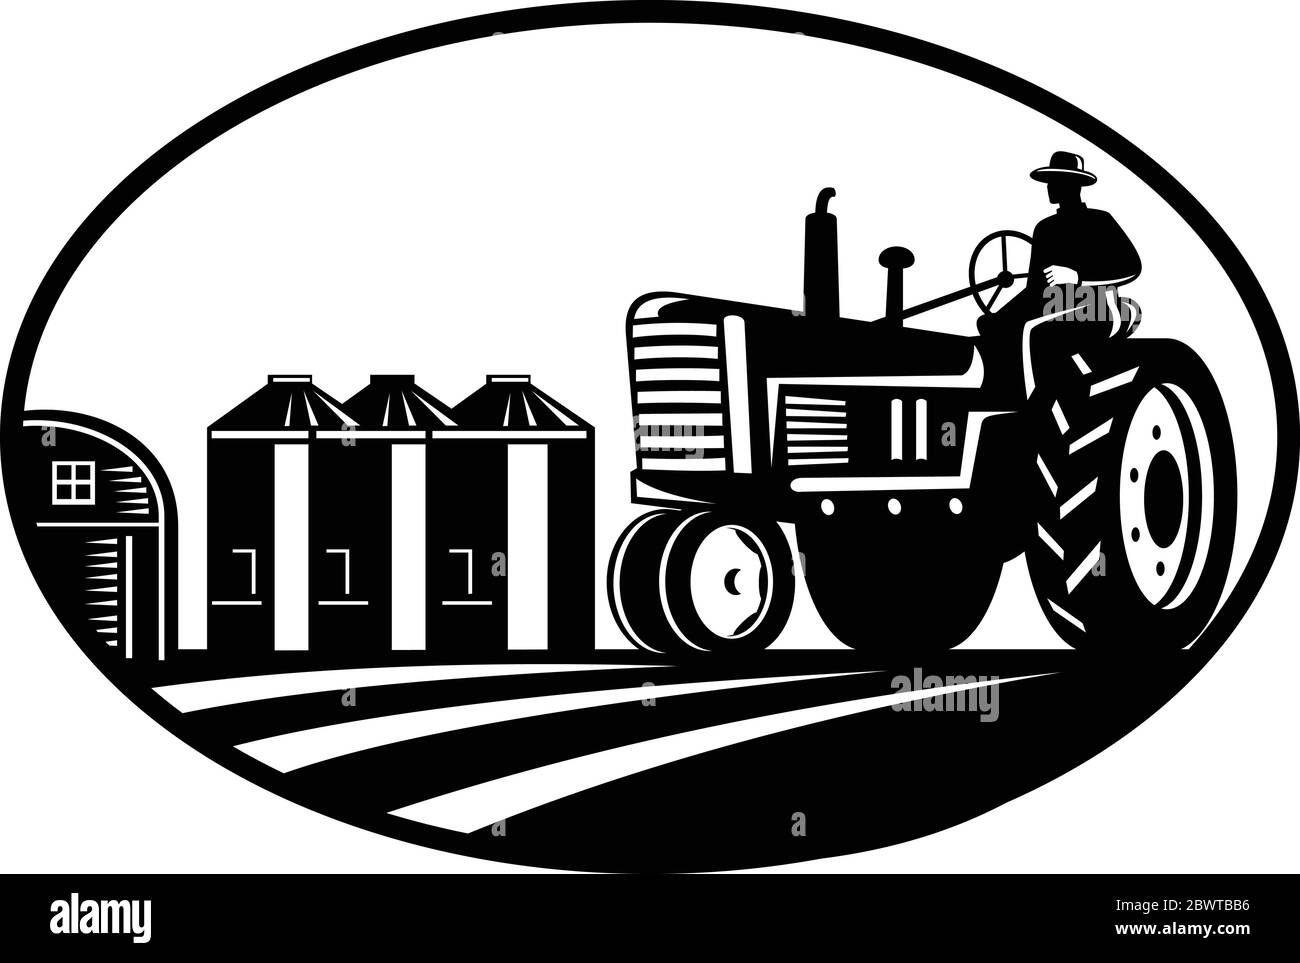 Illustration of a farmer driving a vintage farm tractor with farm barn and silo in the background done in retro woodcut  black and white style. Stock Vector